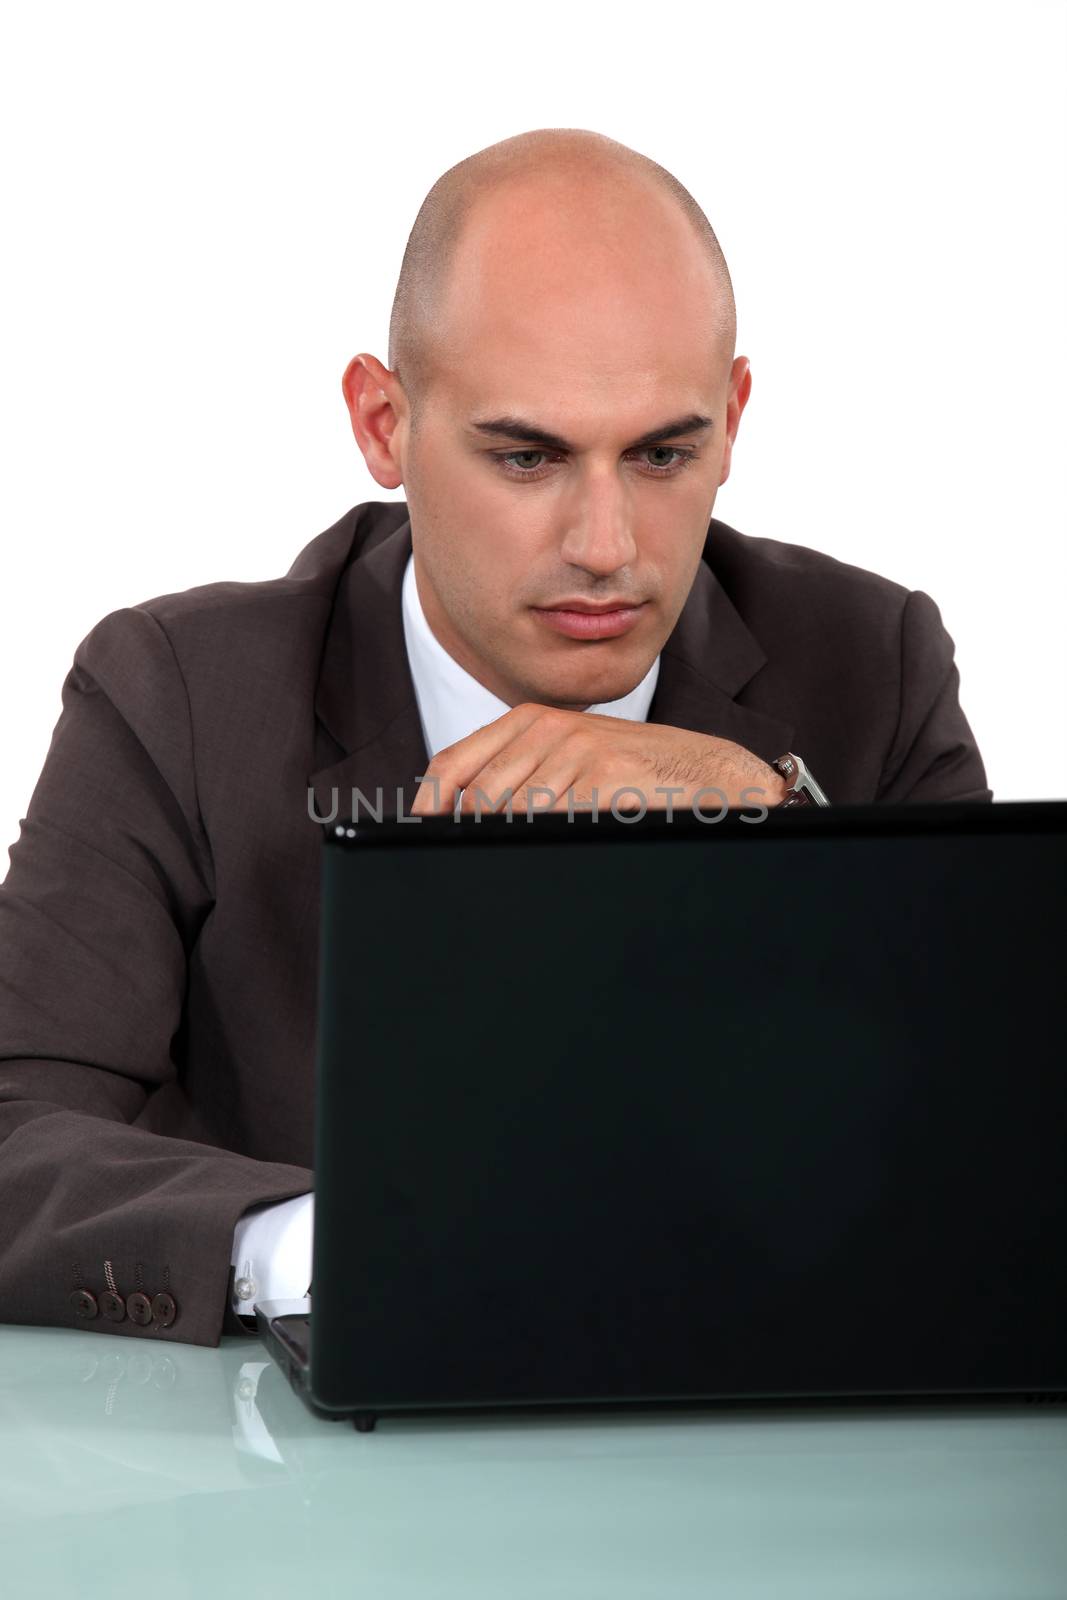 Bald office worker sat at computer